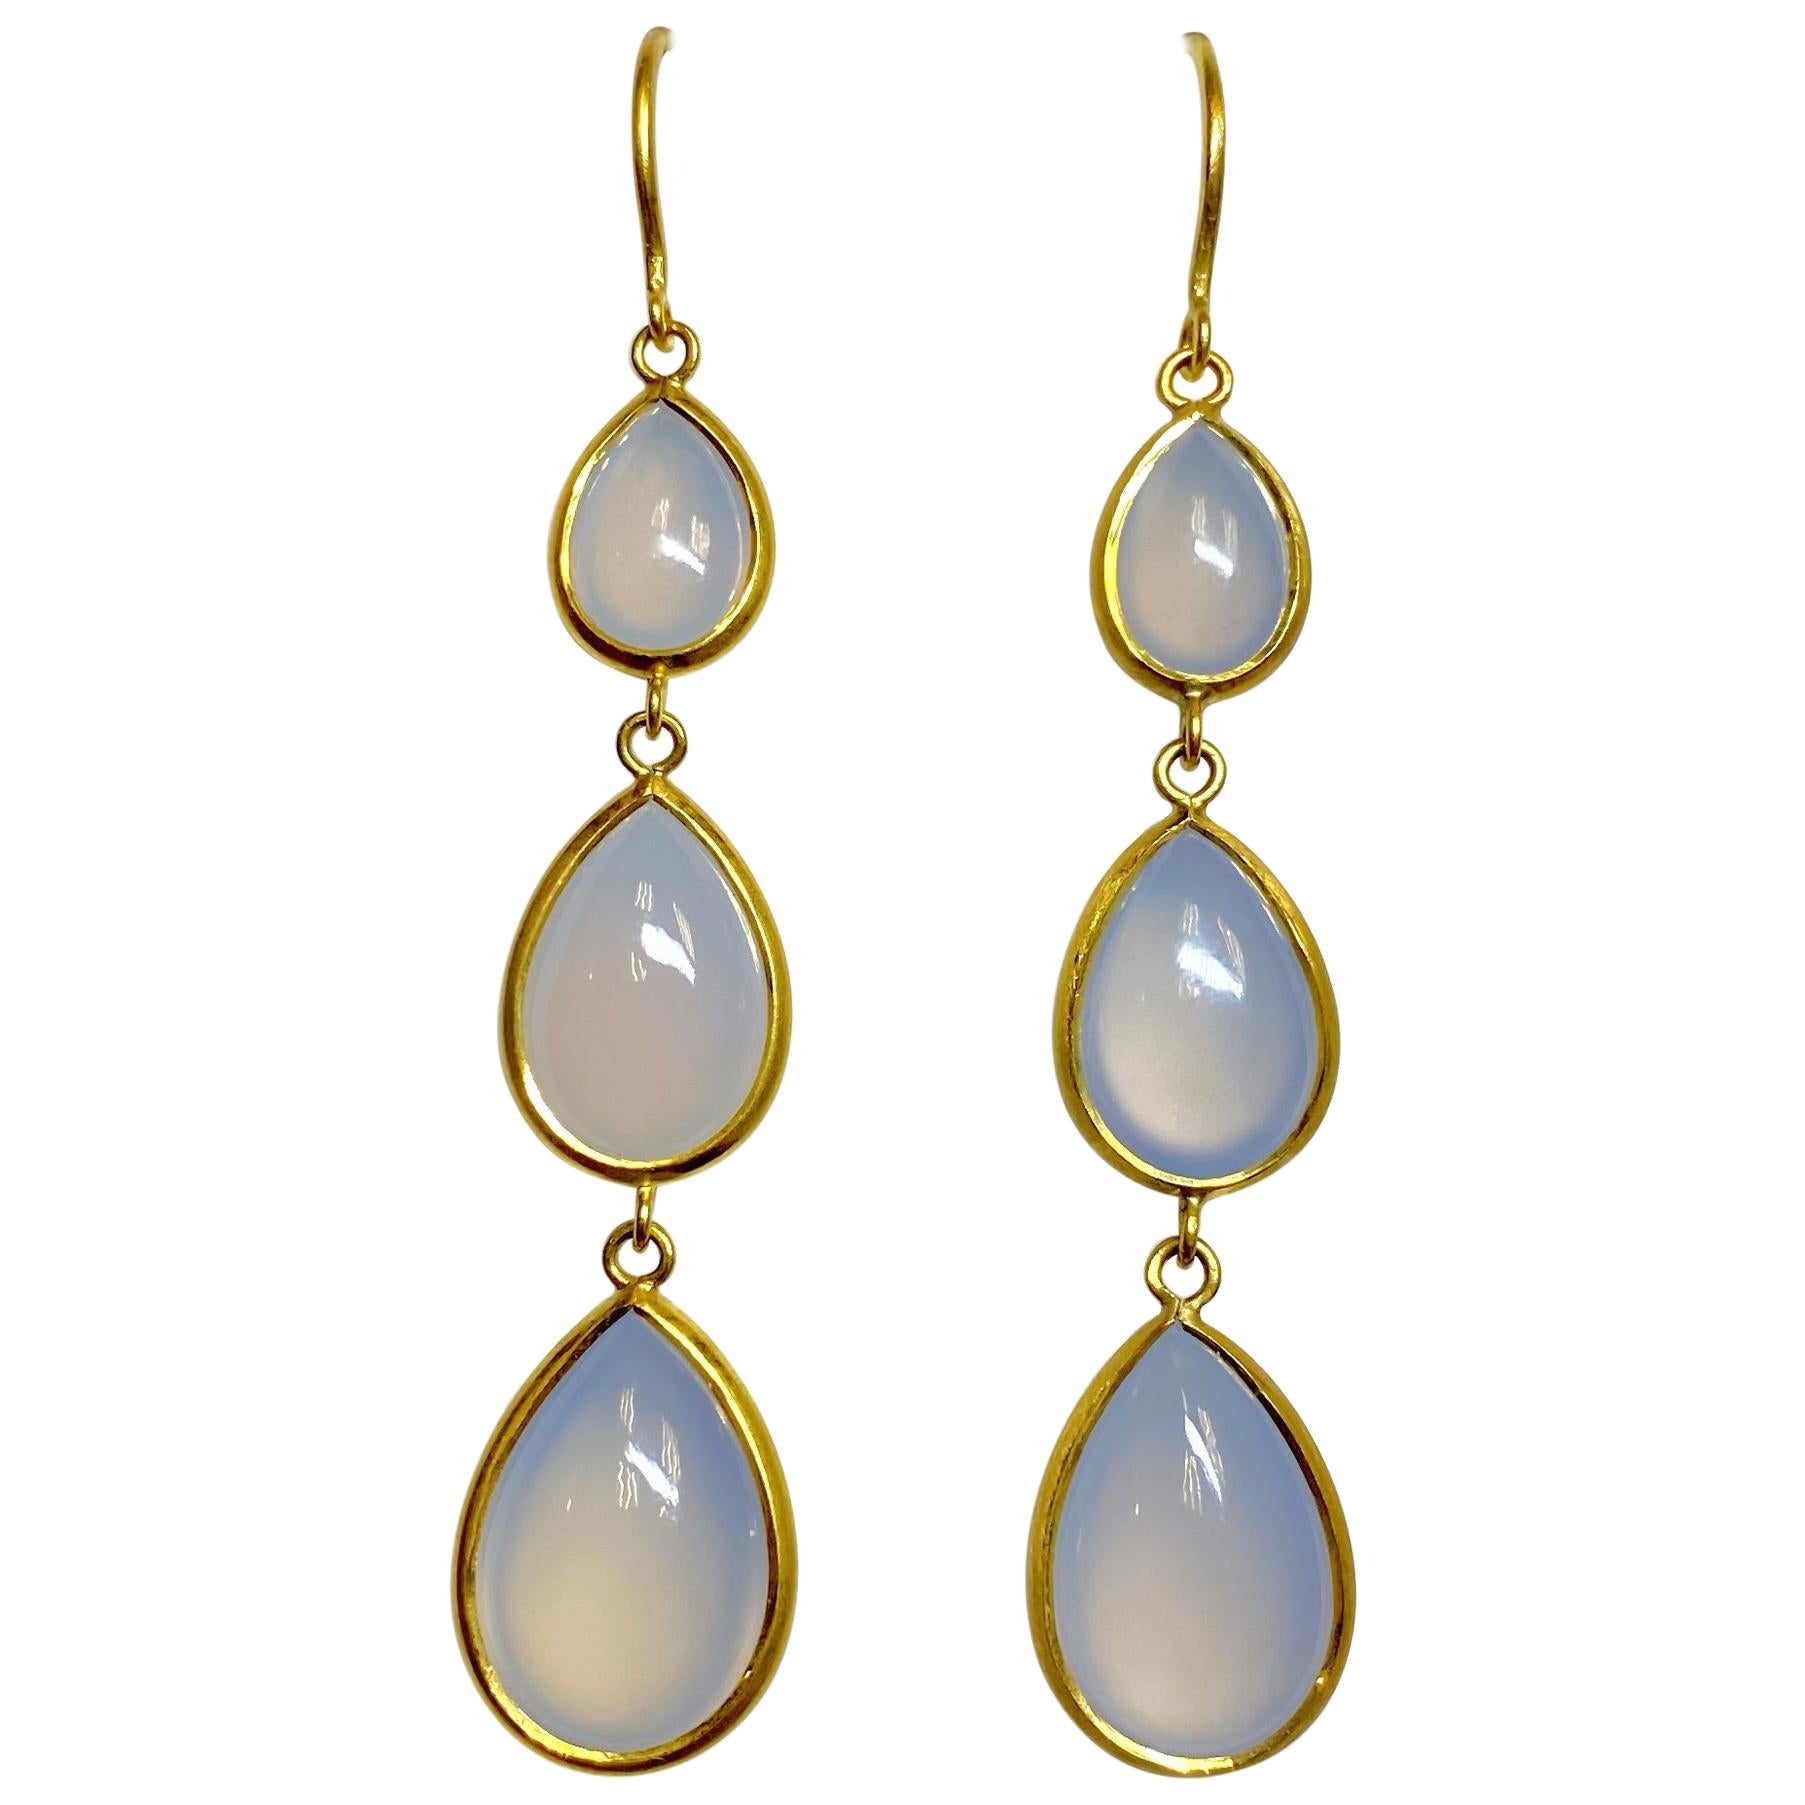 Chalcedony Graduating 2-Sided Pear Earrings in 22 Karat Gold, A2 by Arunashi For Sale